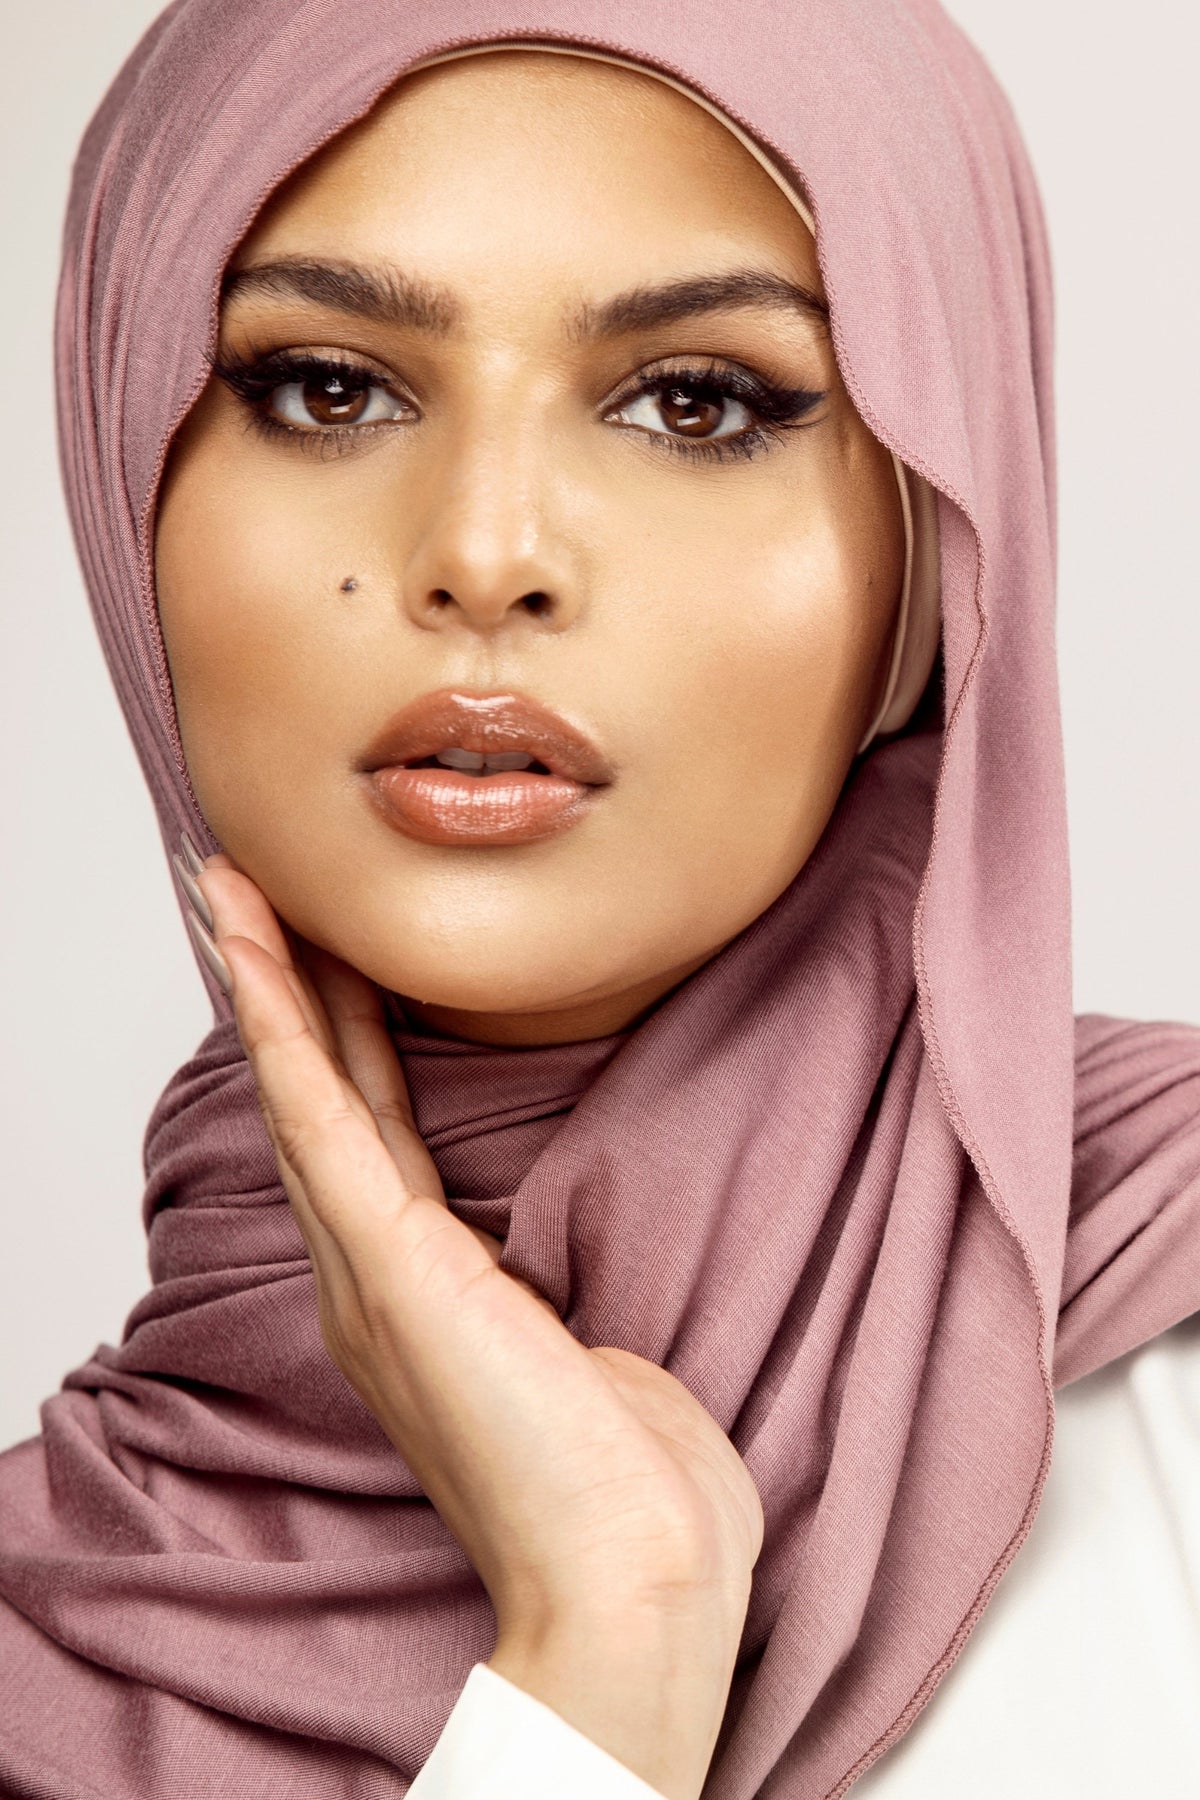 Luxury Jersey Hijab - Soft Mauve Veiled Collection 